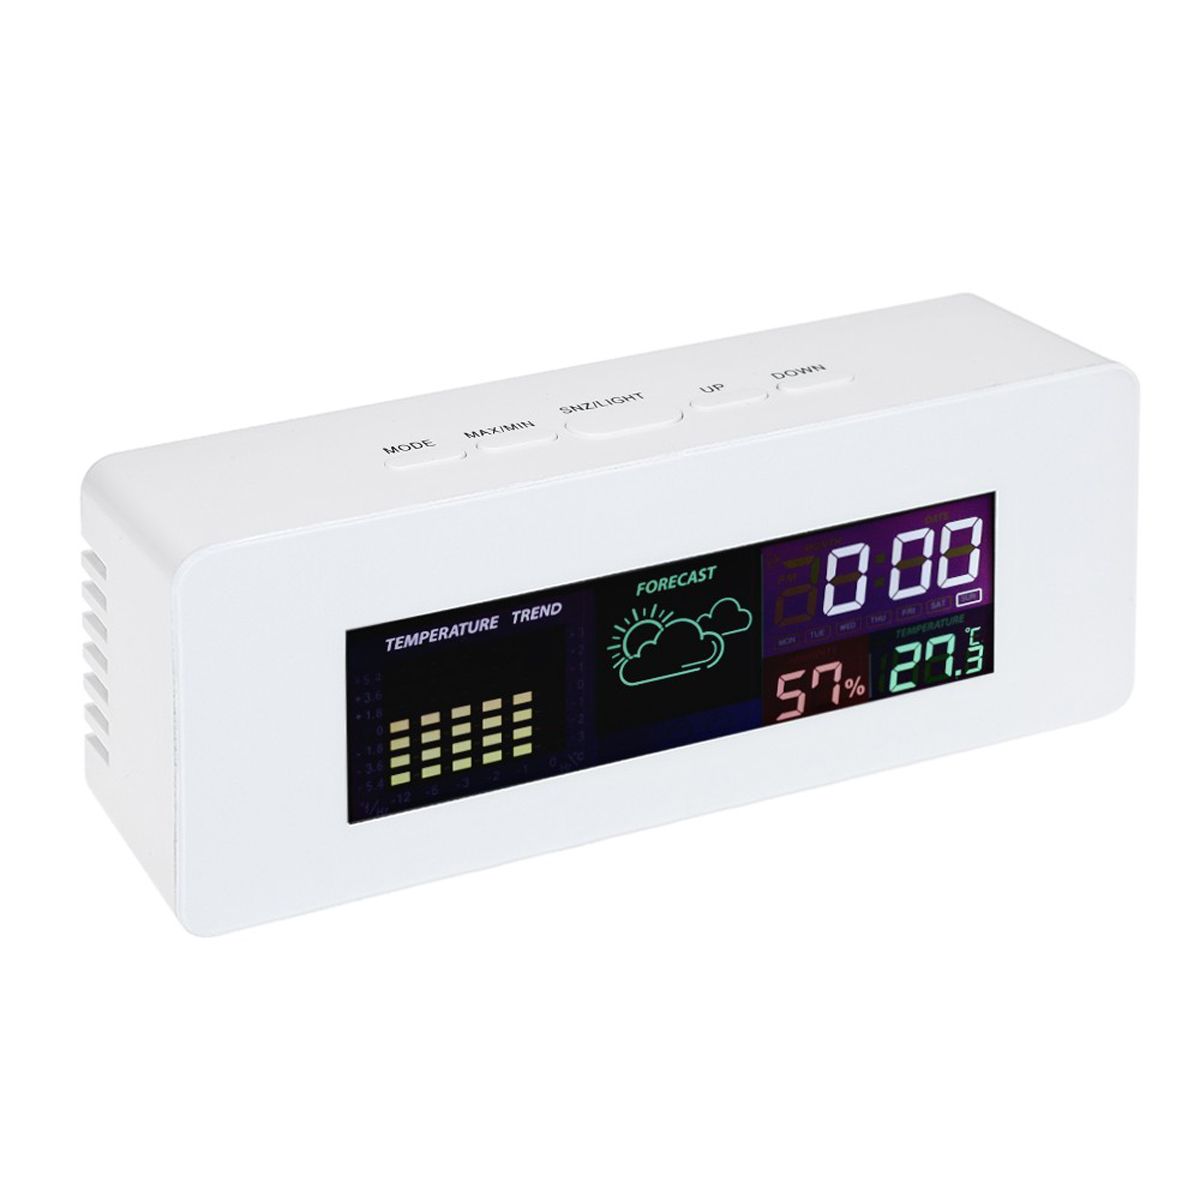 TS-S65-Digital-LCD-Thermometer-Hygrometer-050-Thermometer-With--Alarm-Snooze-Function-1441514